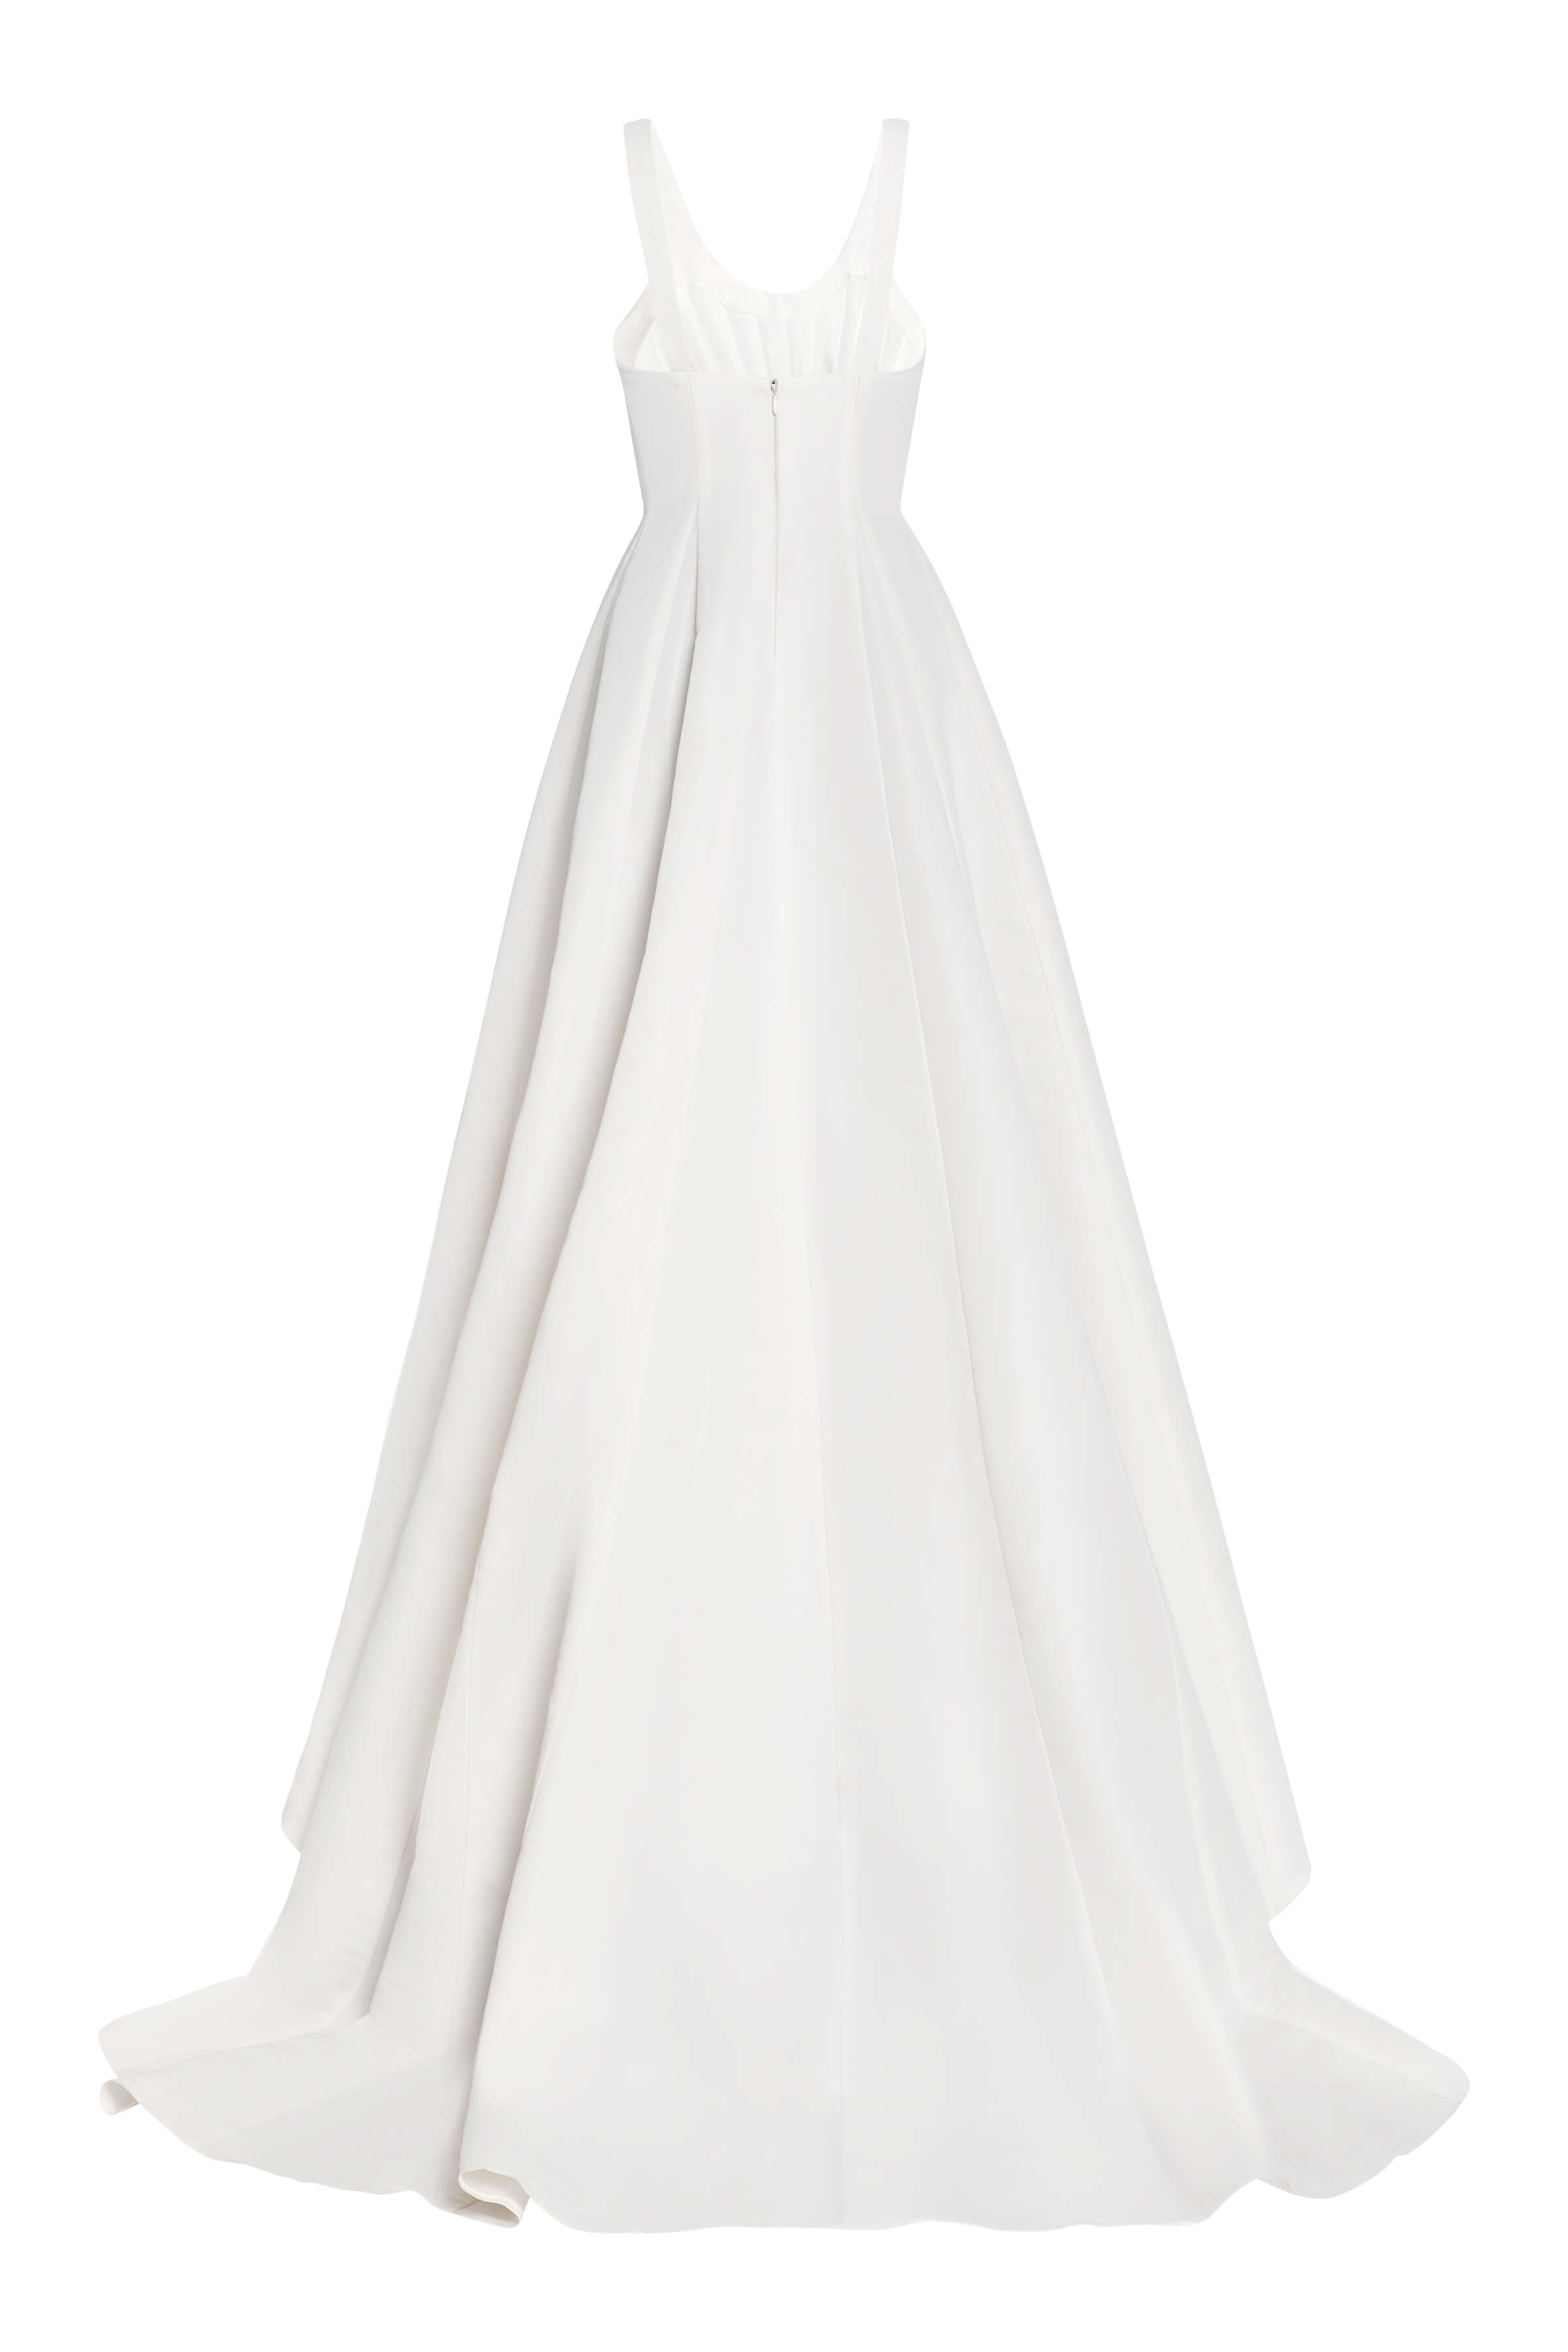 Guinevere White Silk Paneled Gown